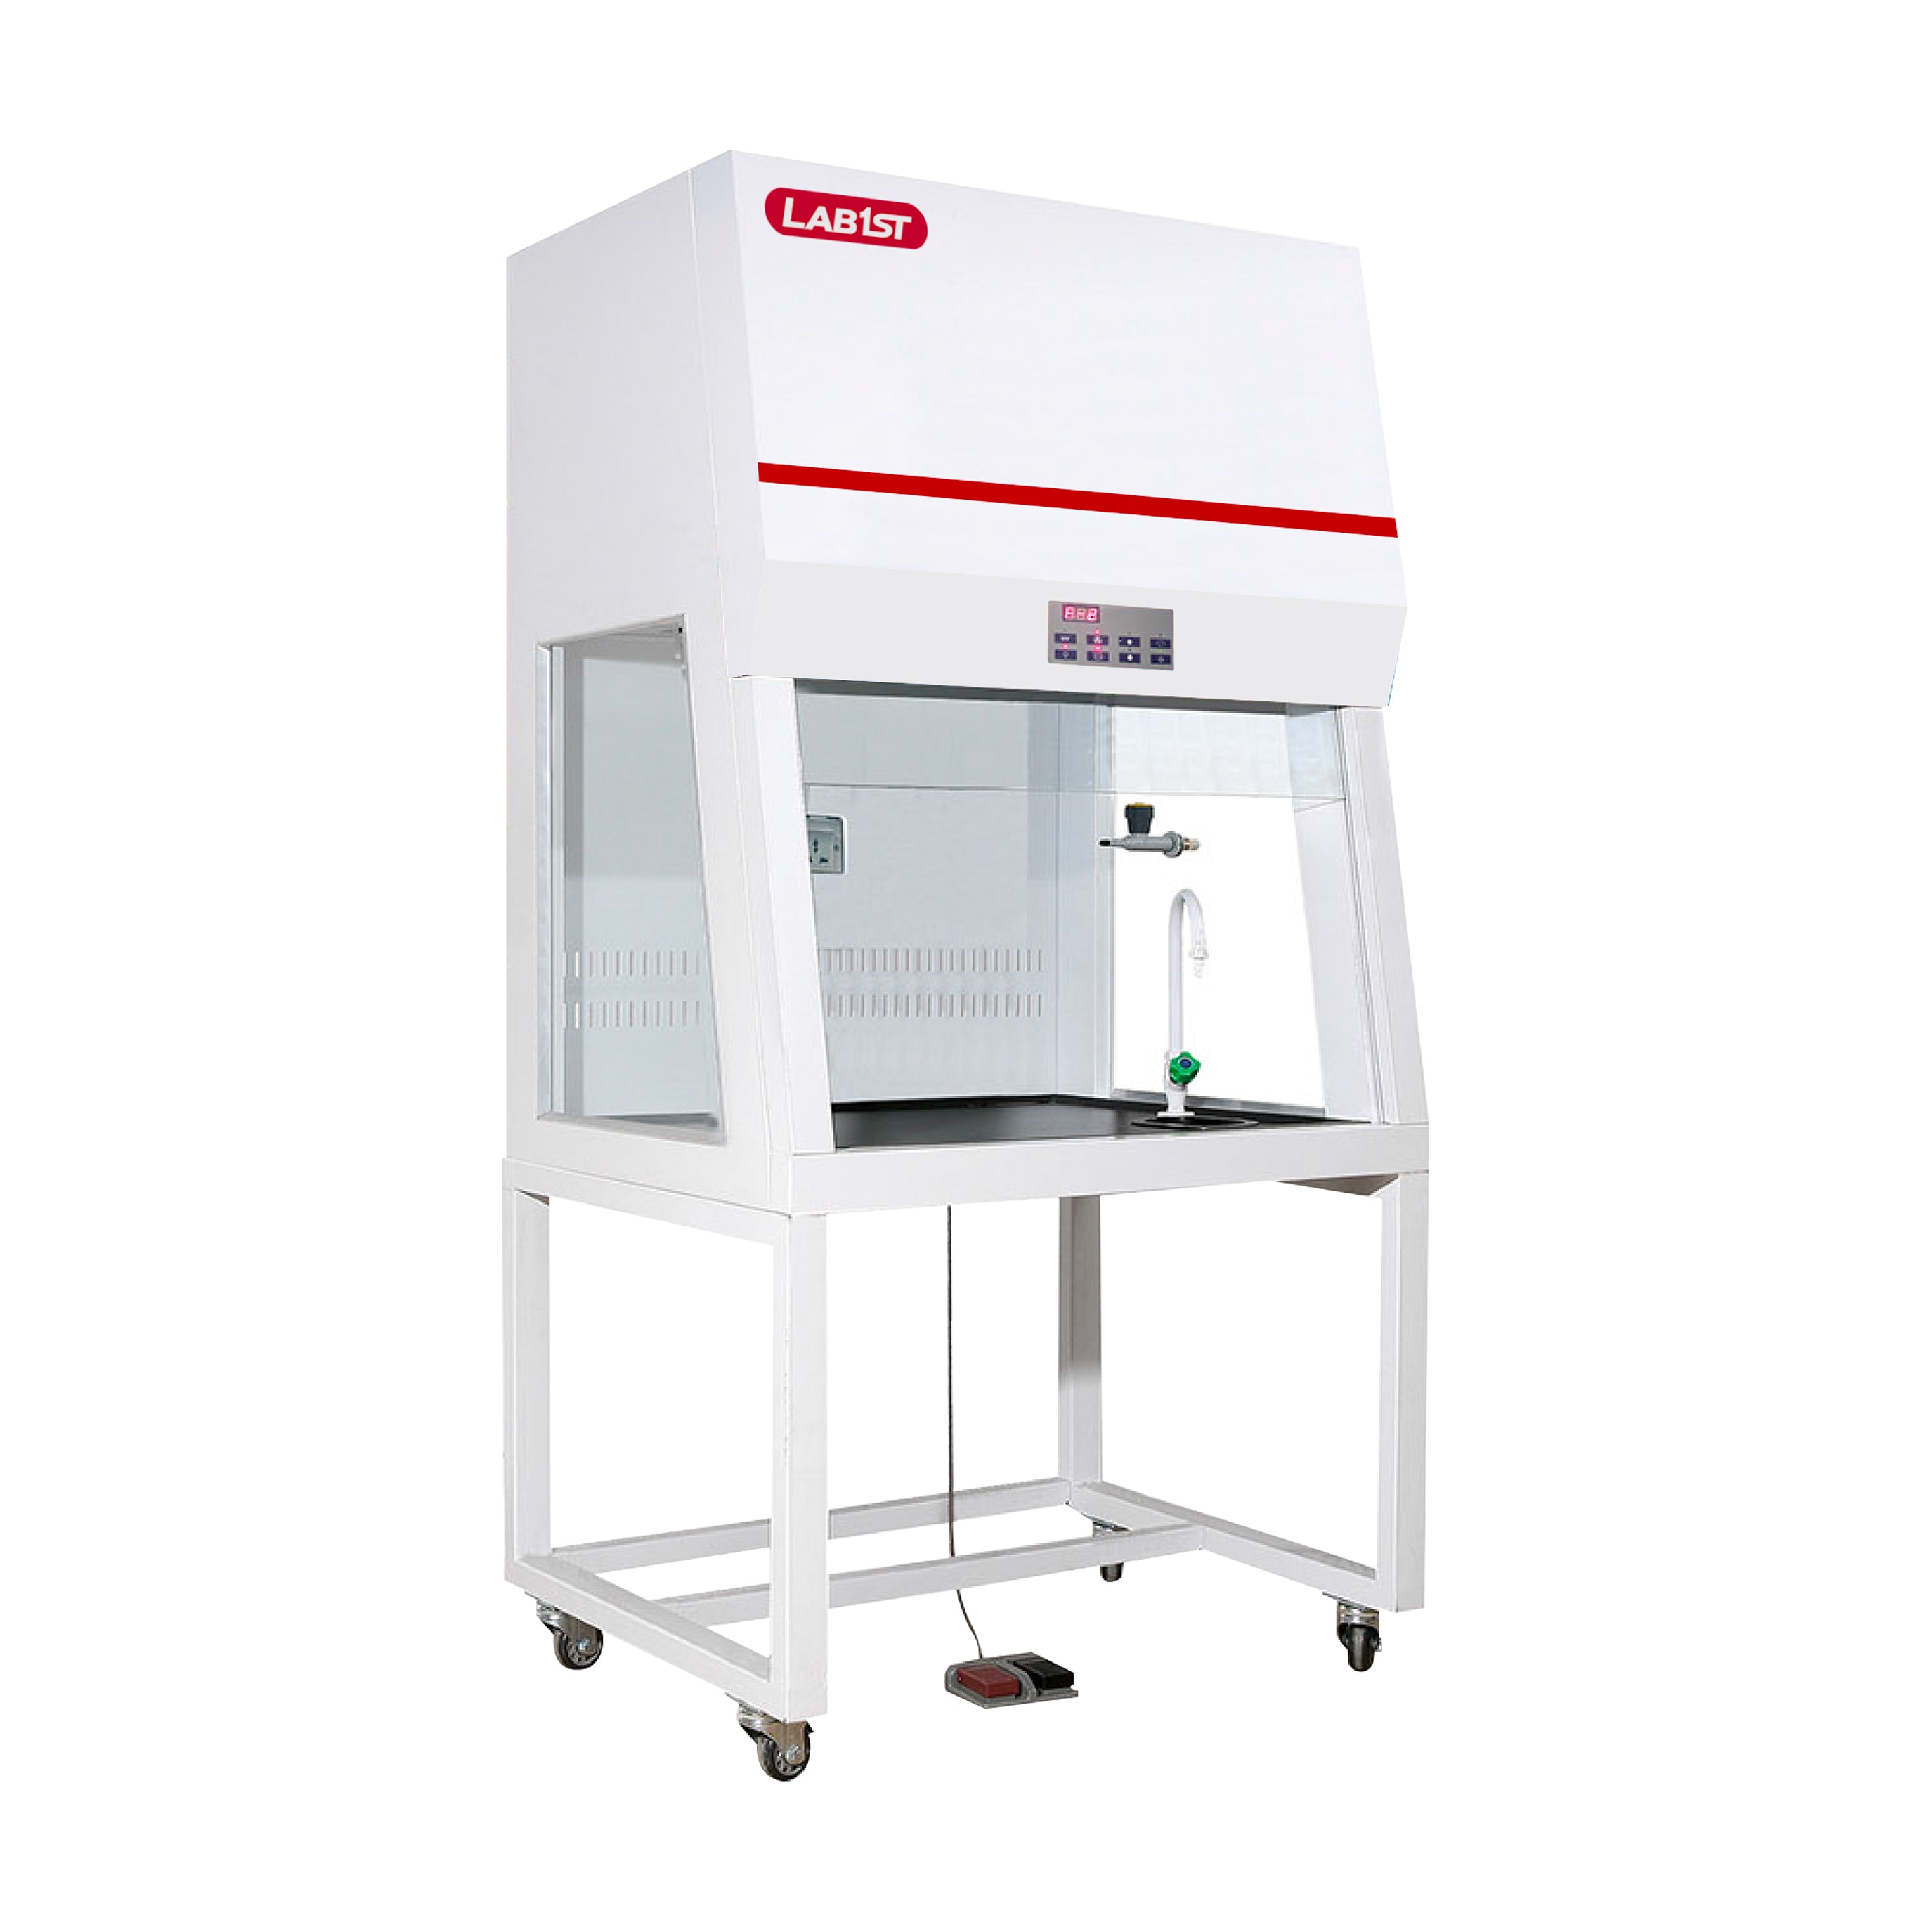 3Ft, 4Ft, 5Ft or 6Ft Slope Ducted Fume Hood